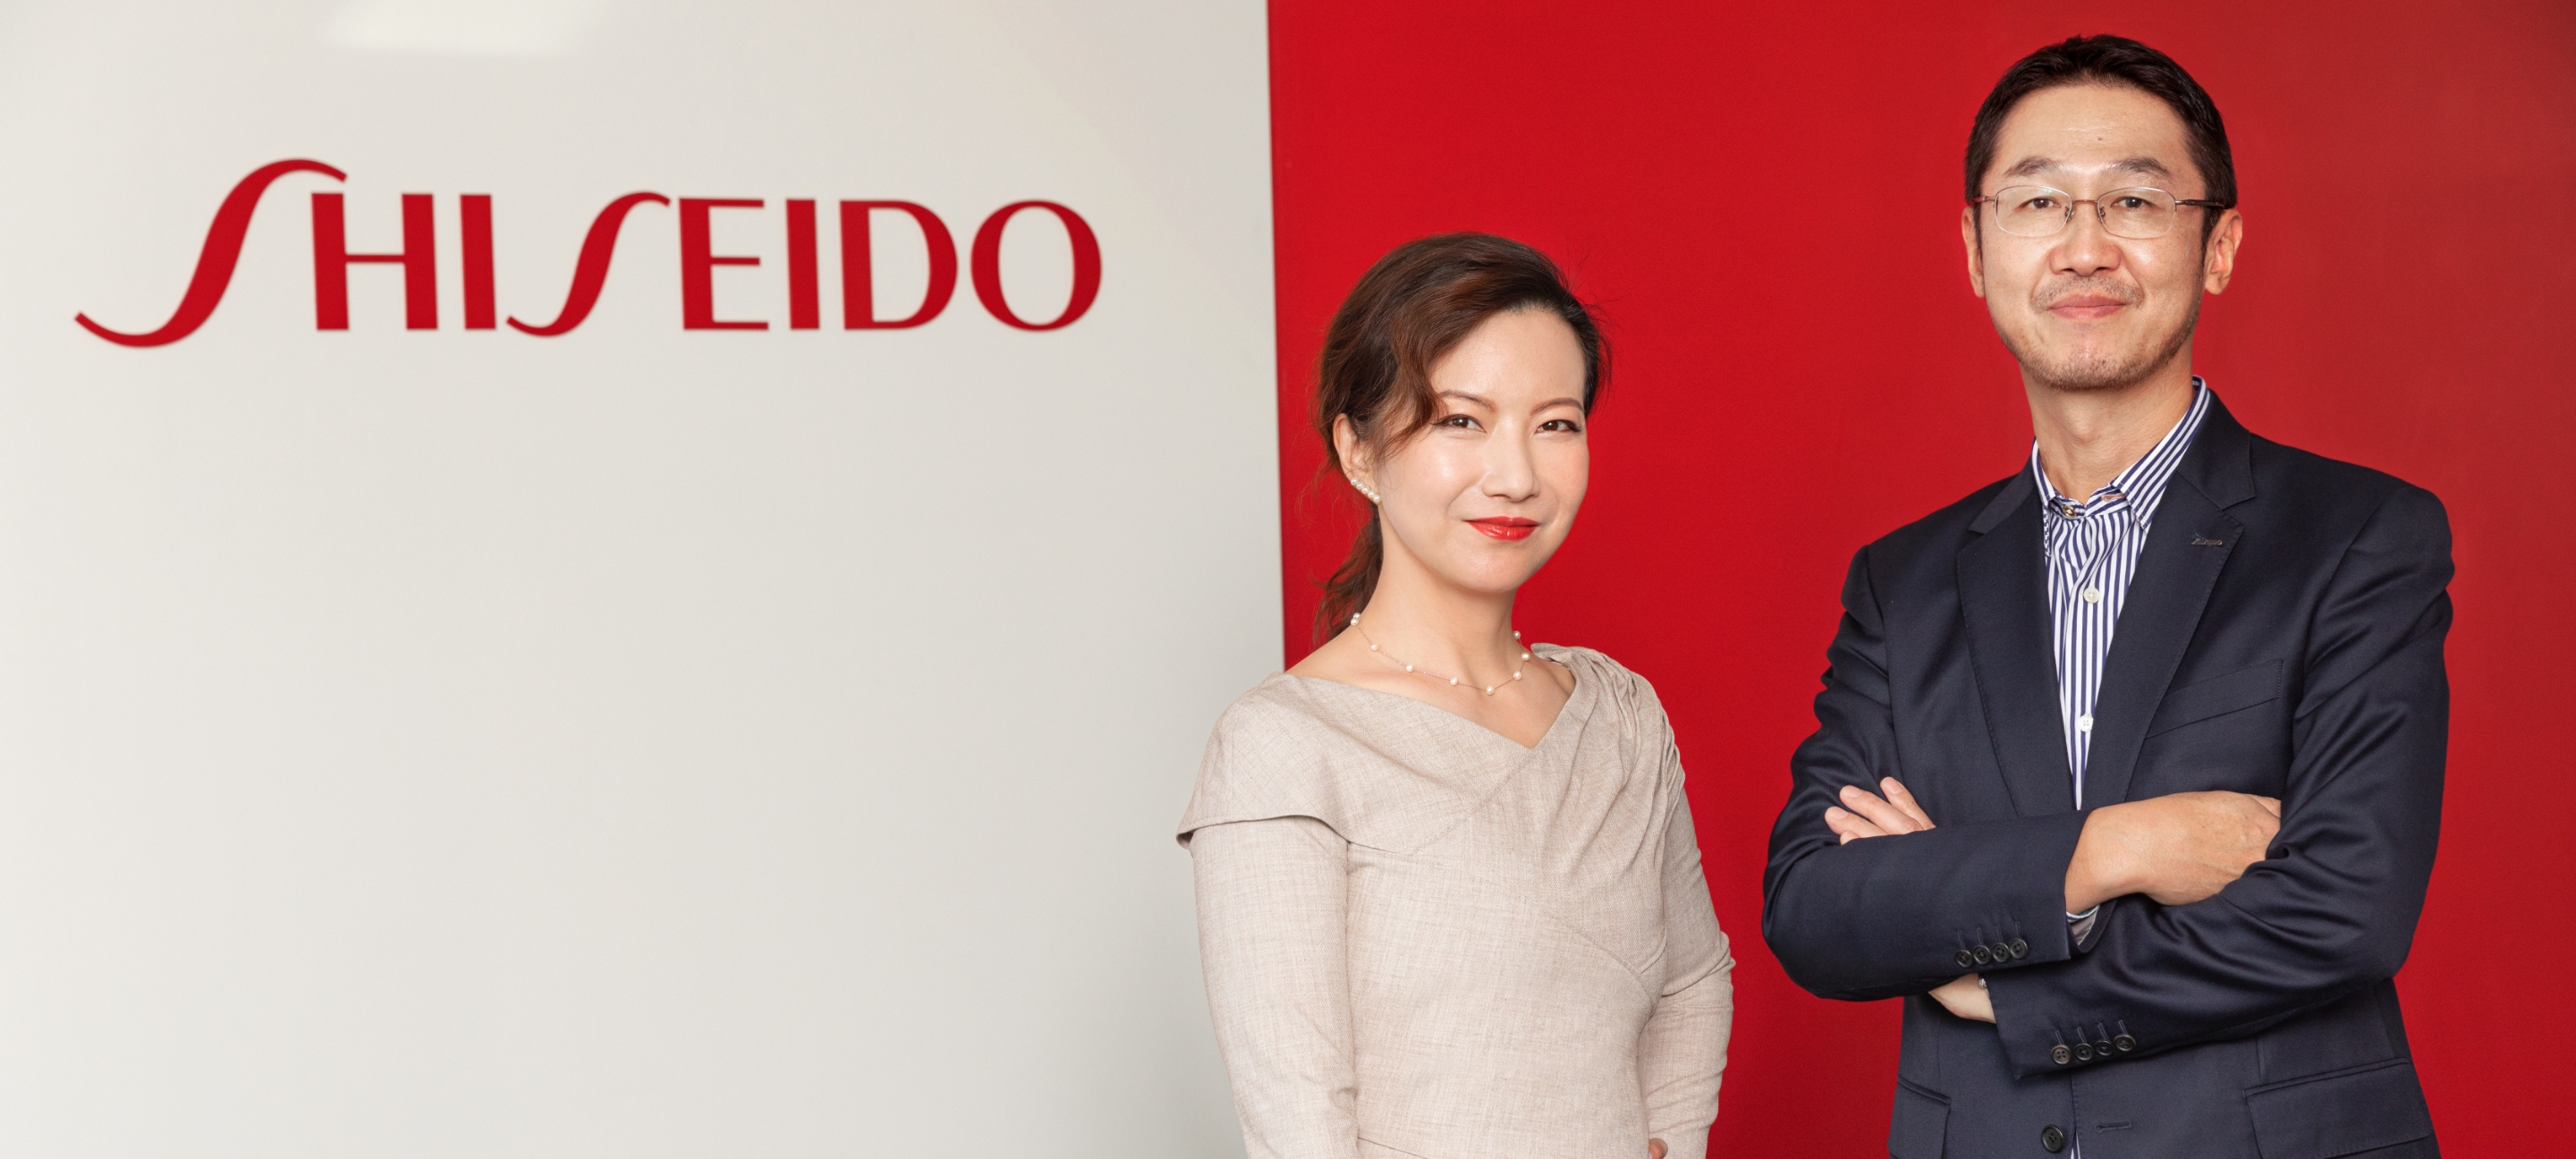 Collaboration is the Key to Shiseido China’s Innovation in the Post-Pandemic World. ~How Shiseido China Plans to Collaborate with the Best Experts to Spark Innovation.~